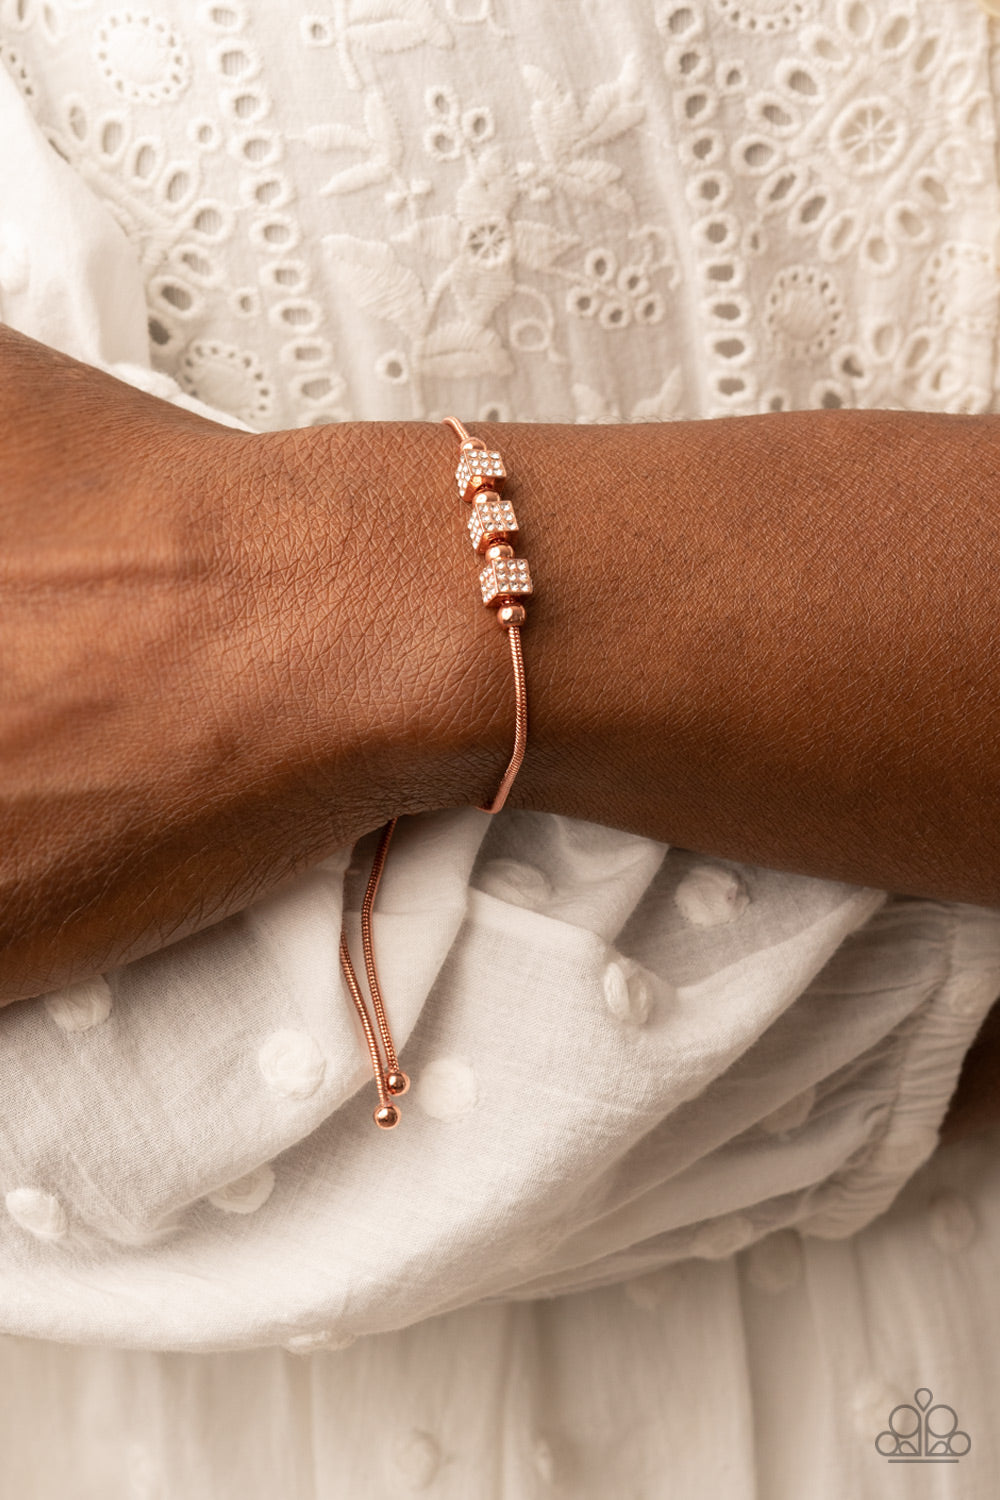 Paparazzi Bracelets - Roll Out the Radiance - Copper